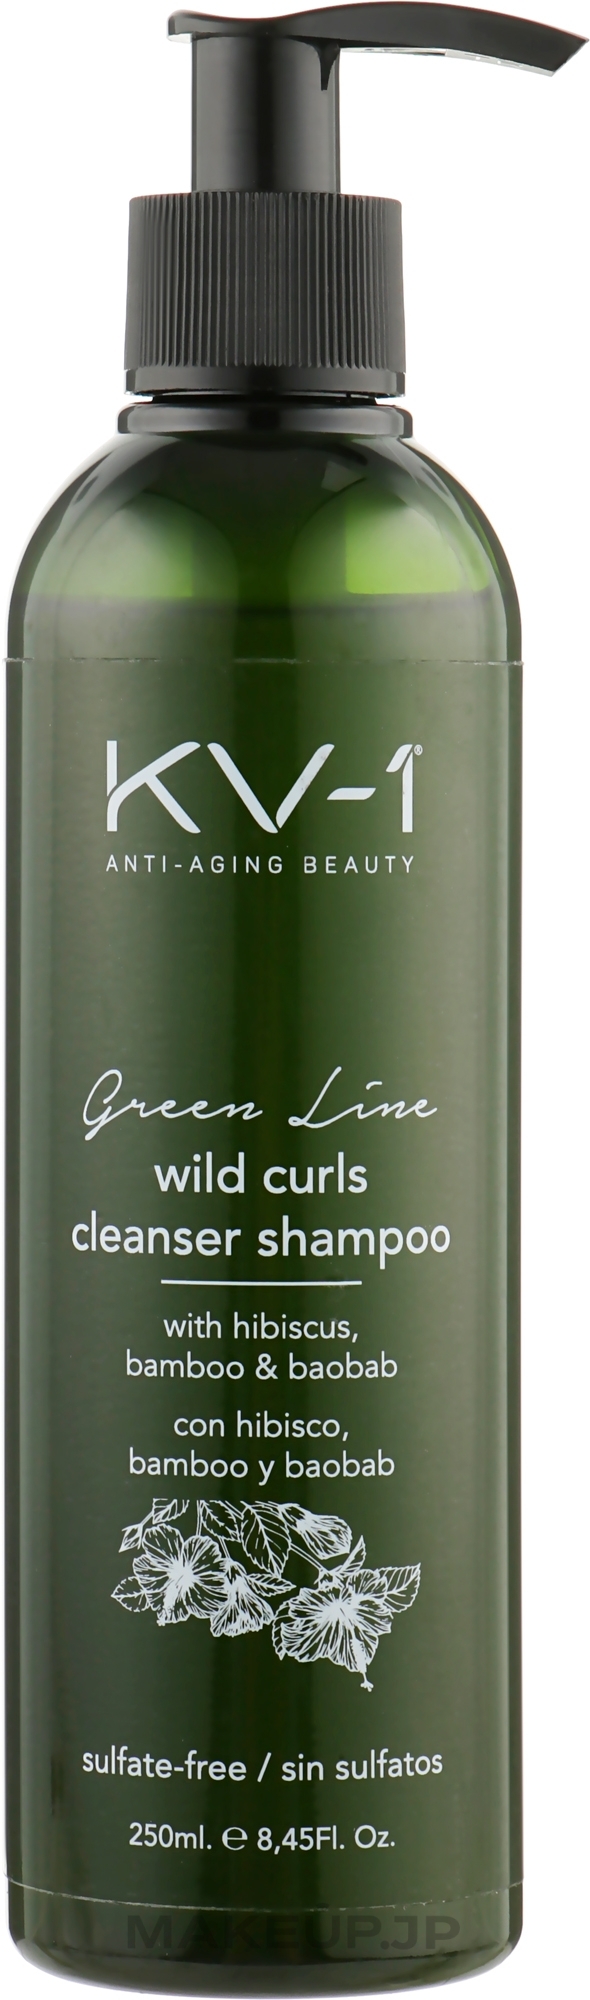 Sulfate-Free Shampoo for Curly Hair - KV-1 Green Line Wild Curls Cleanser Shampoo — photo 250 ml